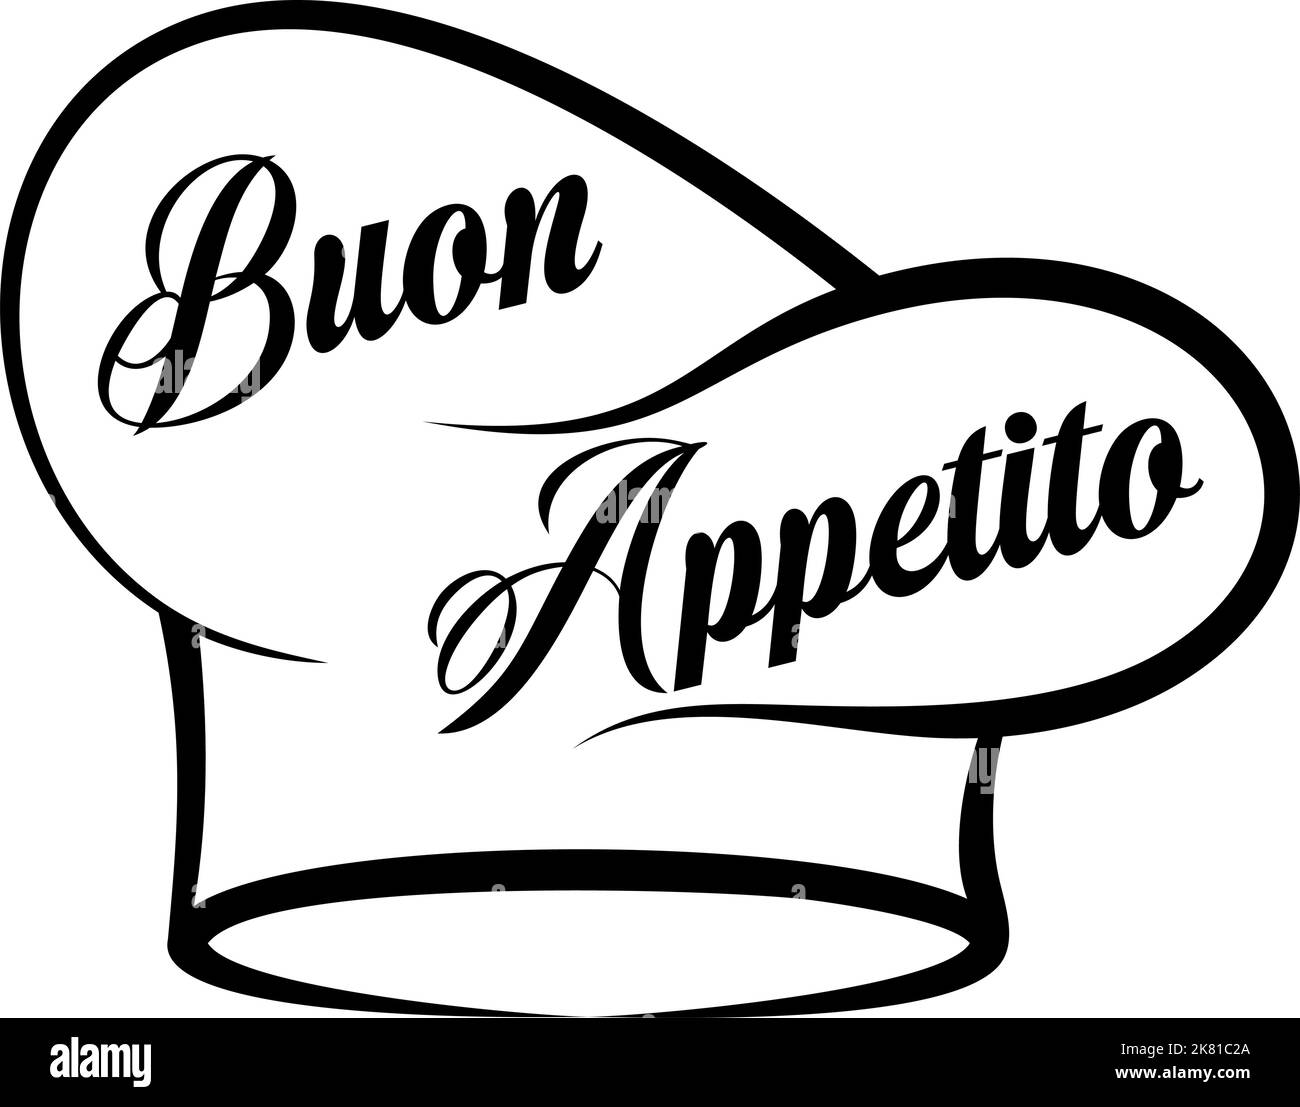 Buon Appetito vector lettering in black. With chef hat. White isolated background. Translation: Buon Appetito is Enjoy your meal. Stock Vector